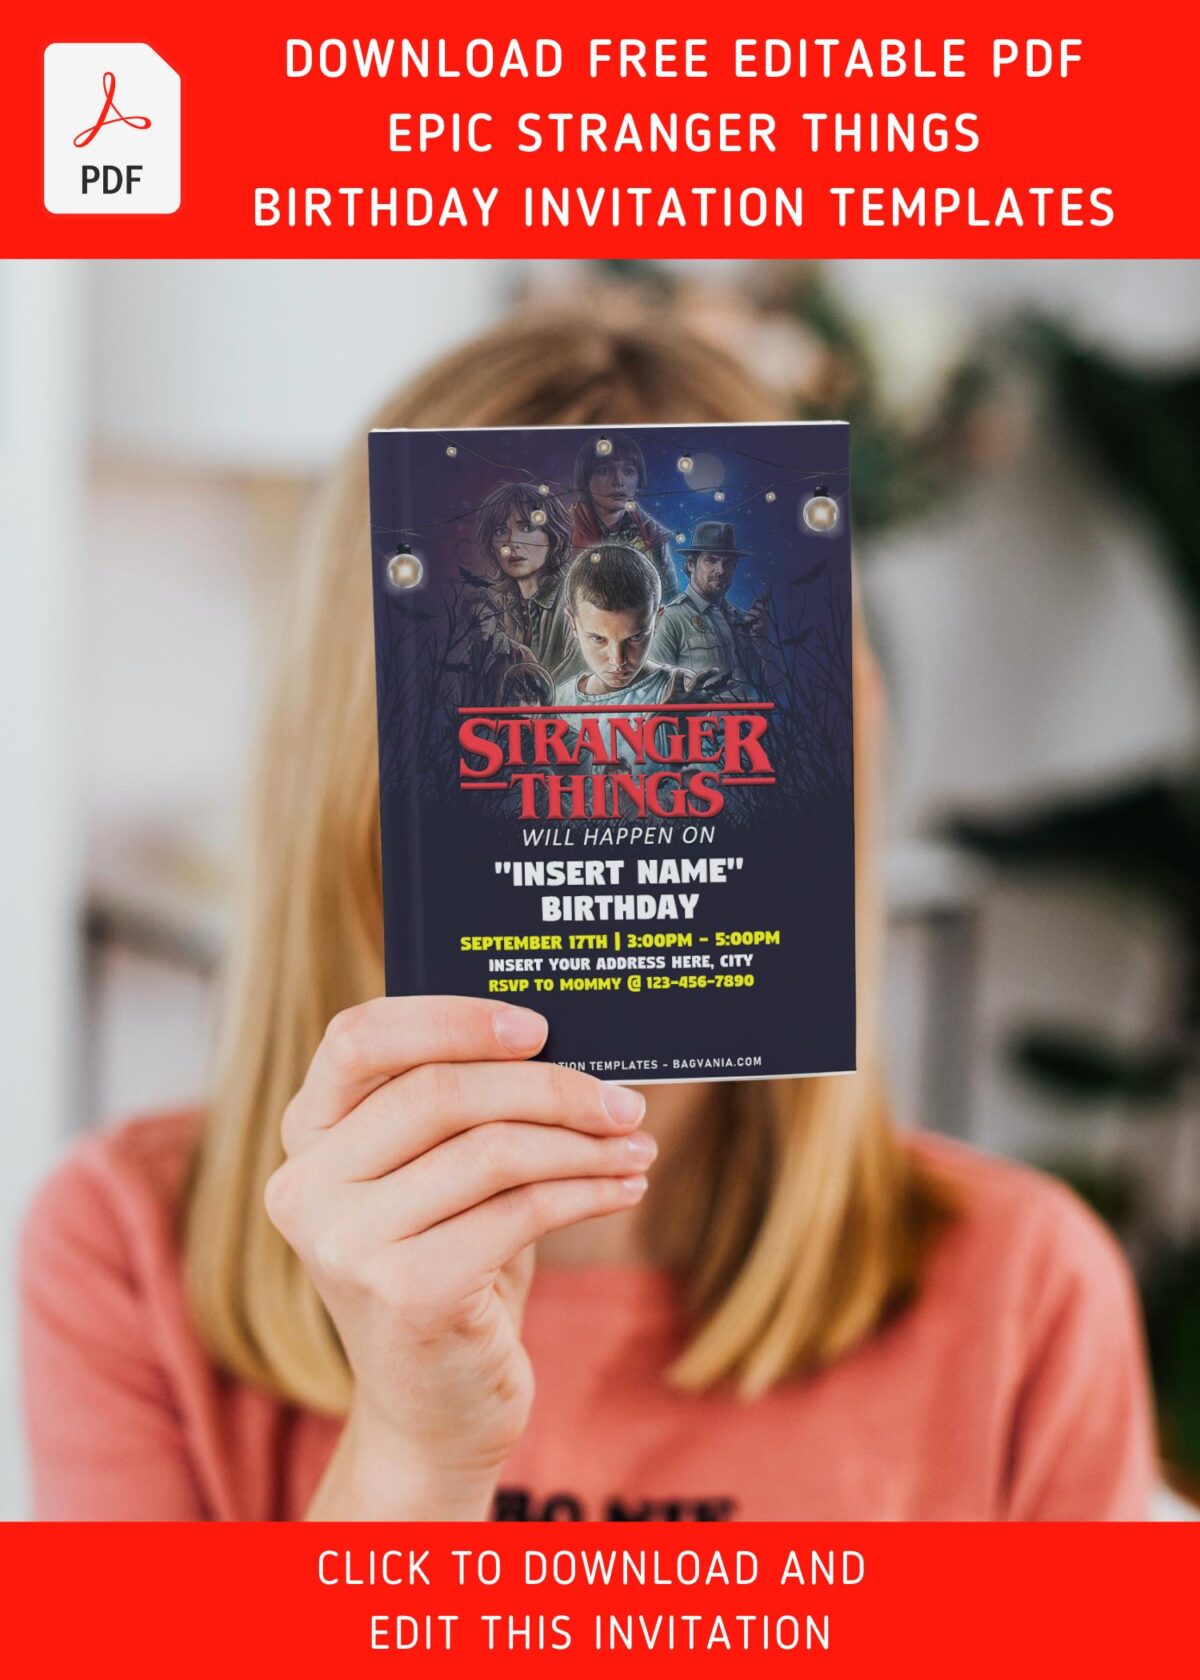 (Free Editable PDF) Stranger Things Are Happening Birthday Invitation Templates with Stranger Thing background